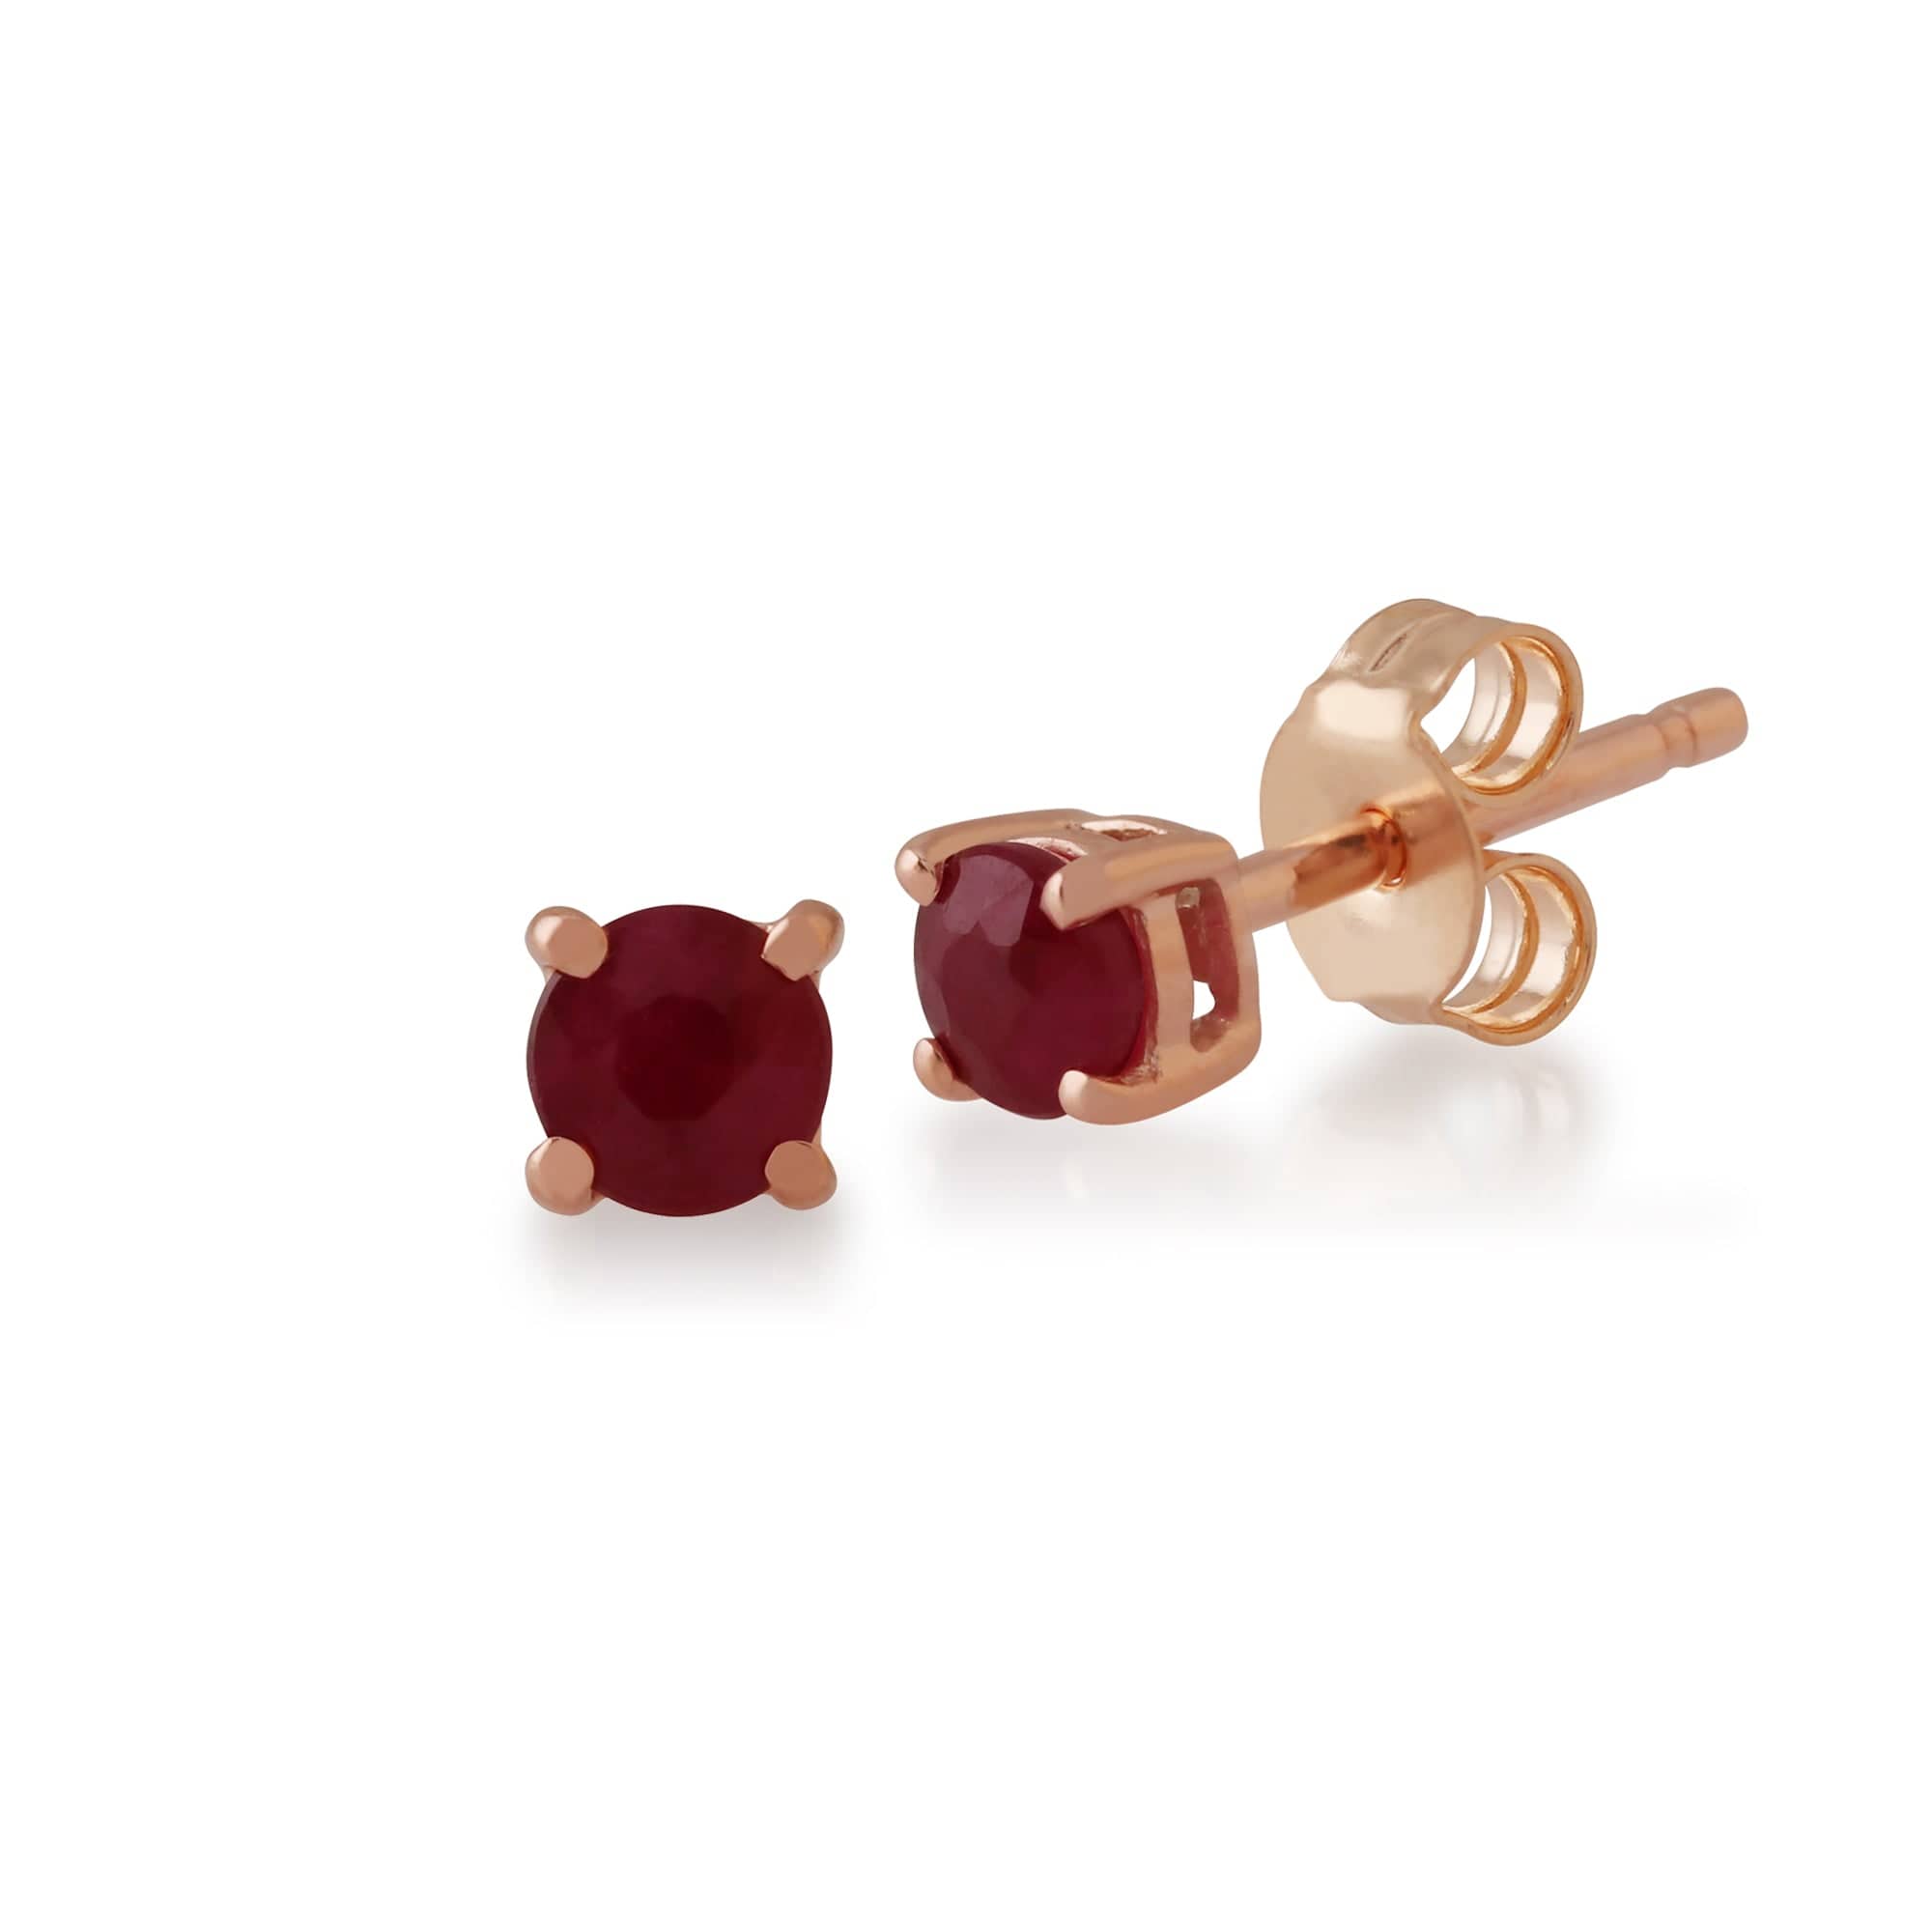 Classic Round Ruby Stud Earrings with Detachable Diamond Round Earrings Jacket Set in 9ct Rose Gold - Gemondo